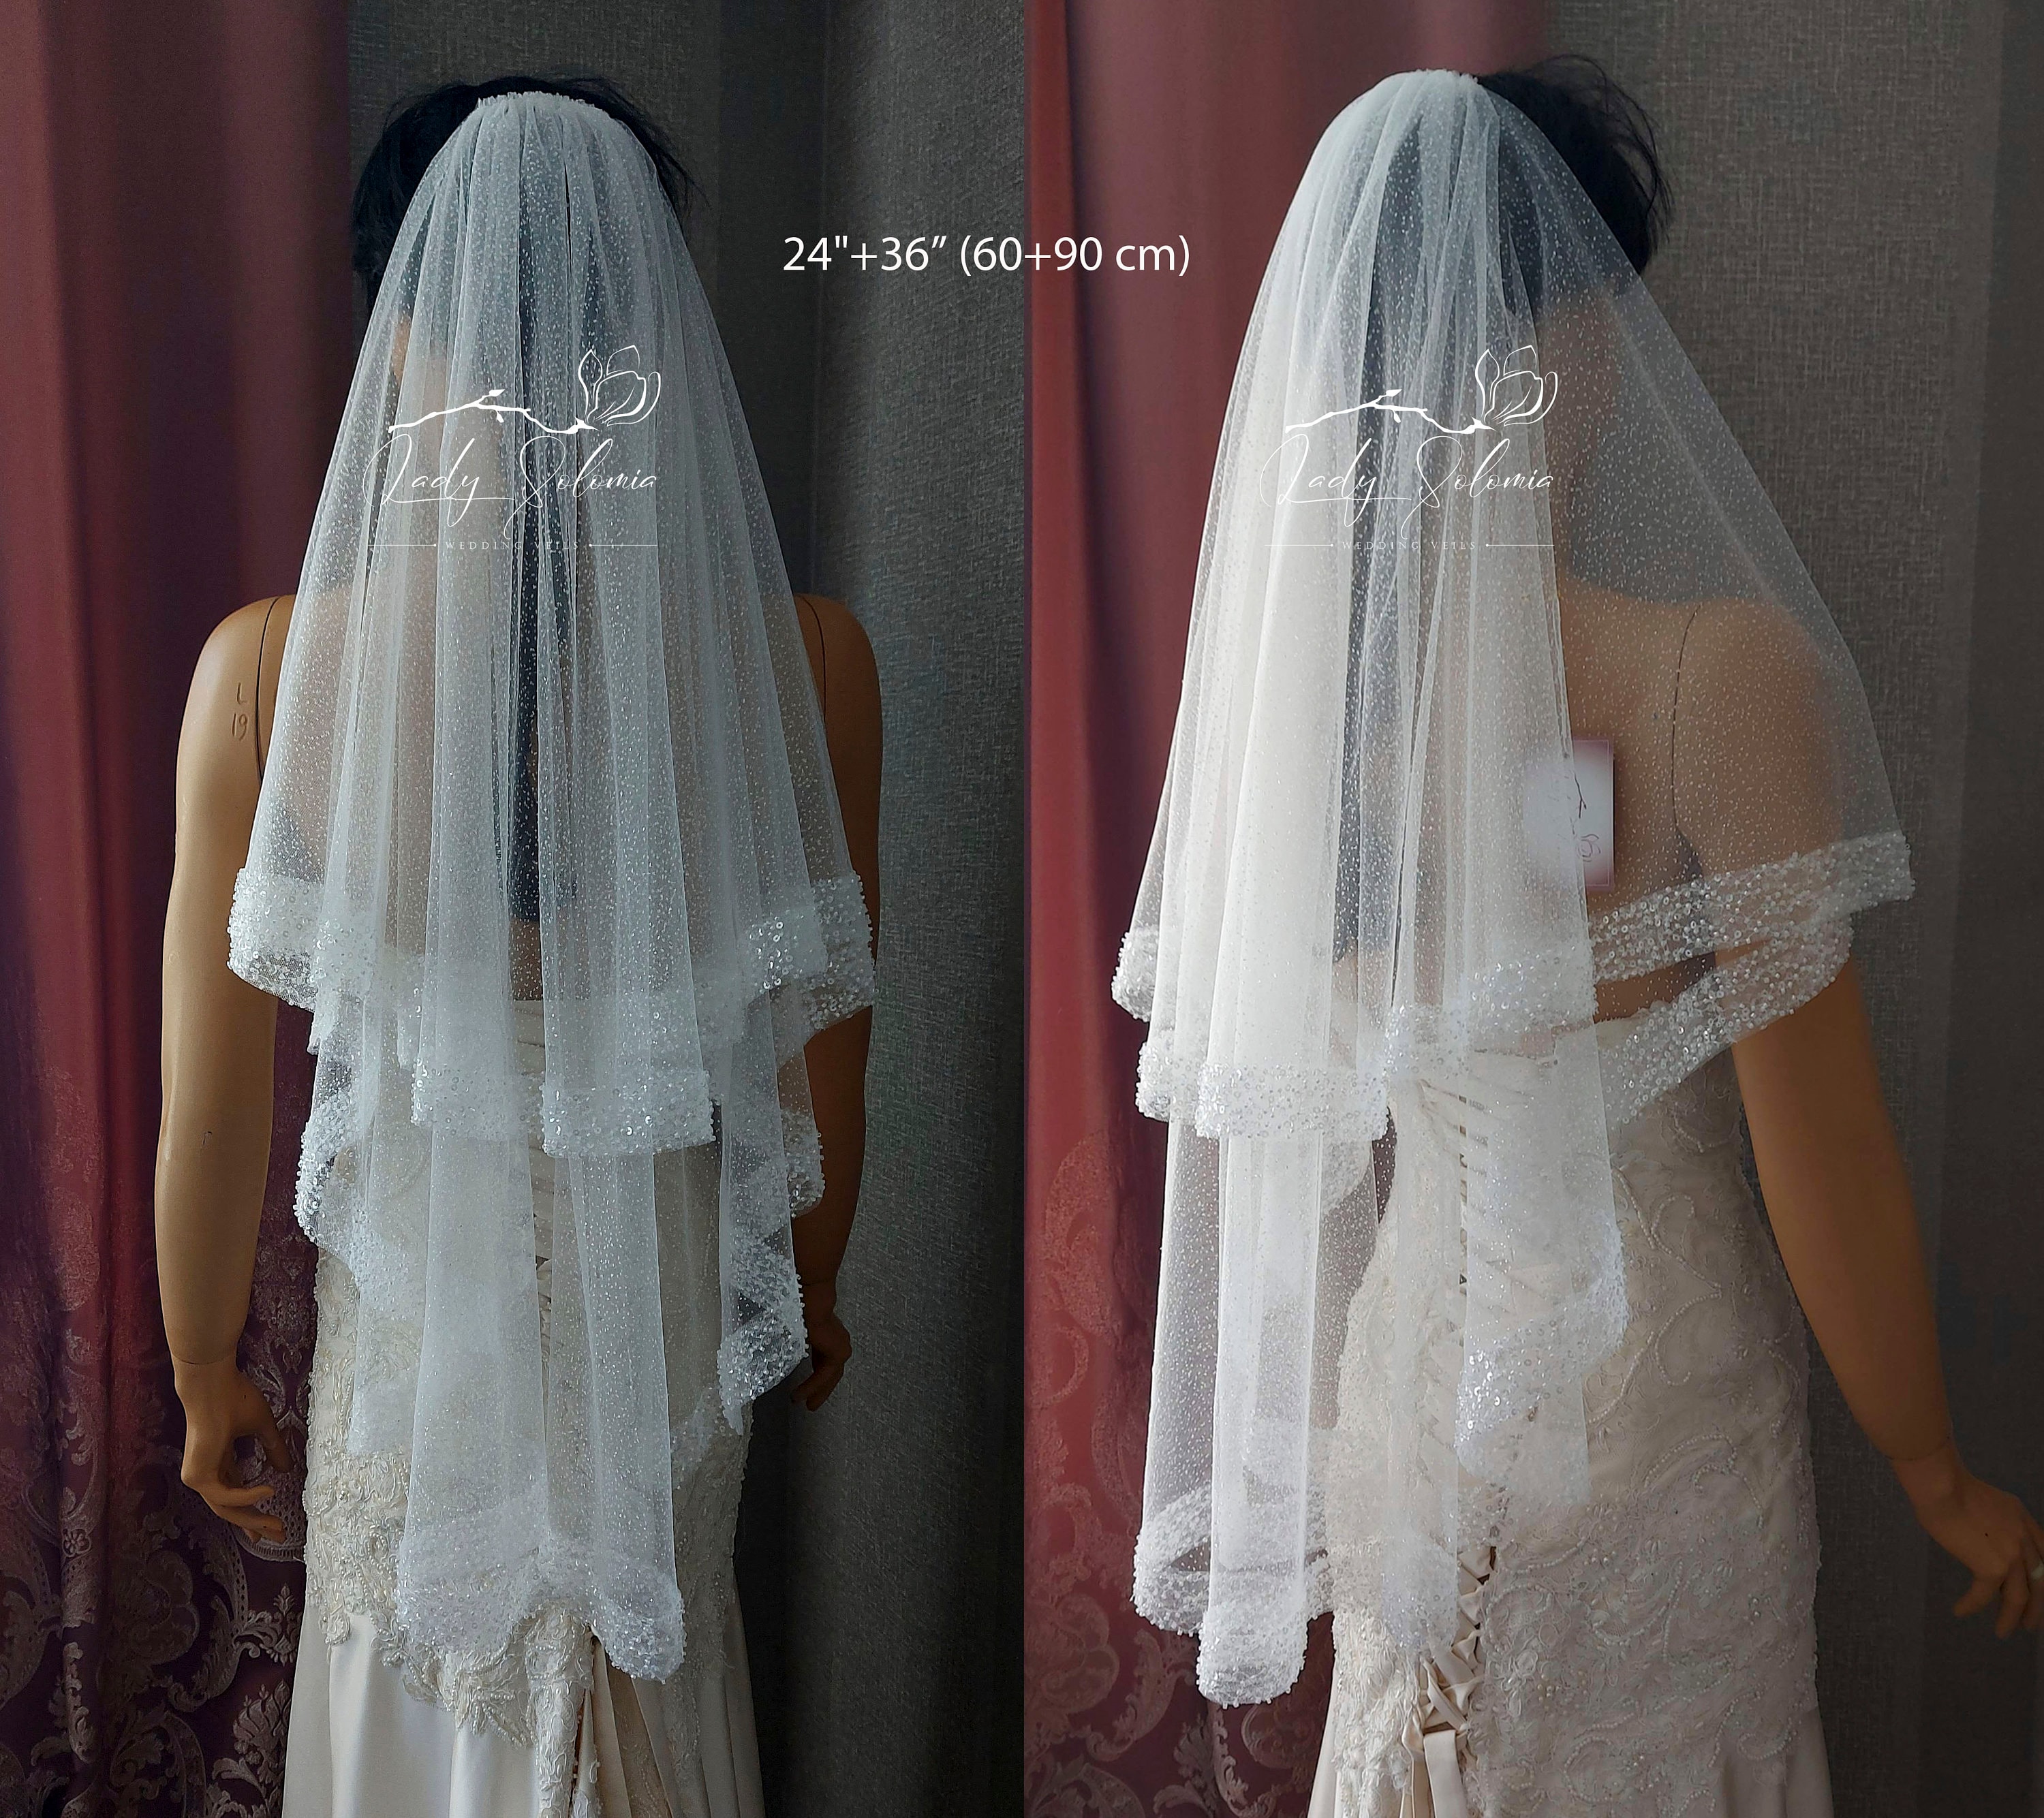 Bridal Glitter veil with beads Sparkling fingertip white and ivory